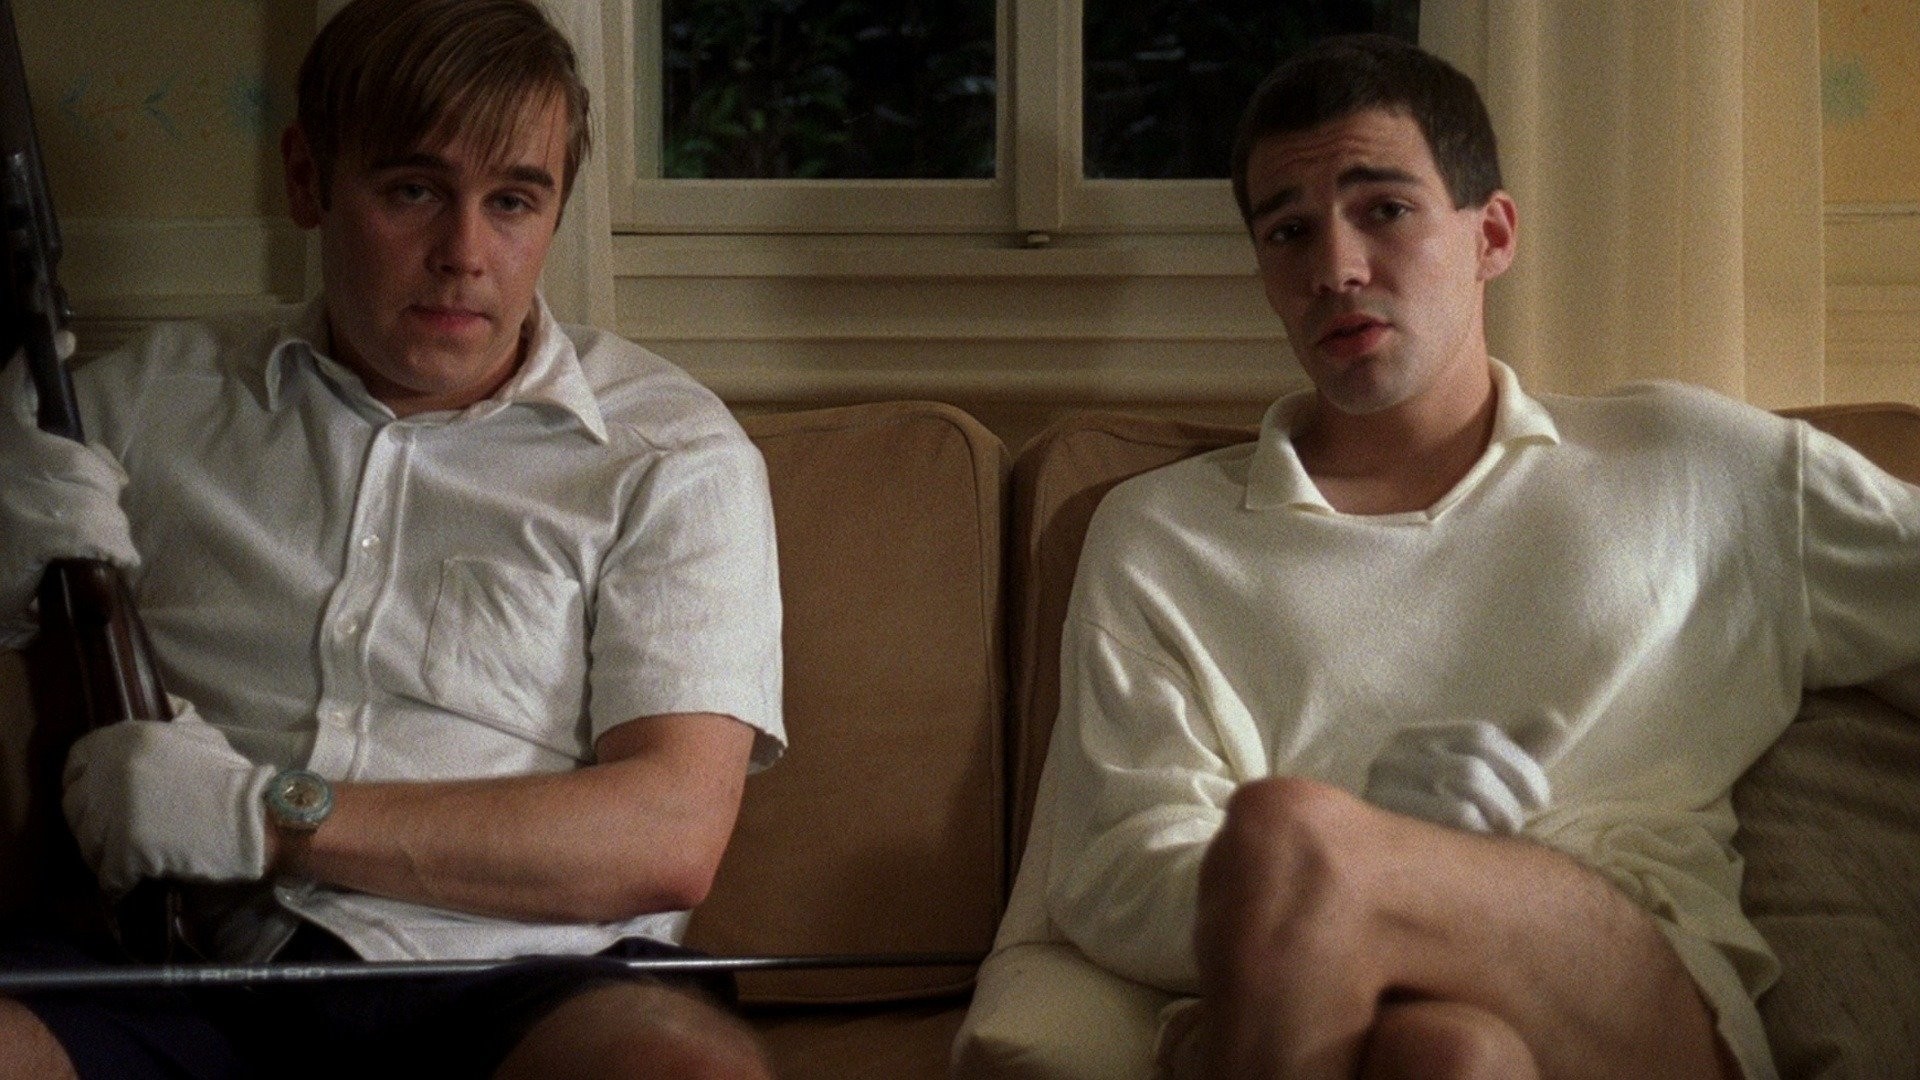 Watch Funny Games 1997 Movie Free Online